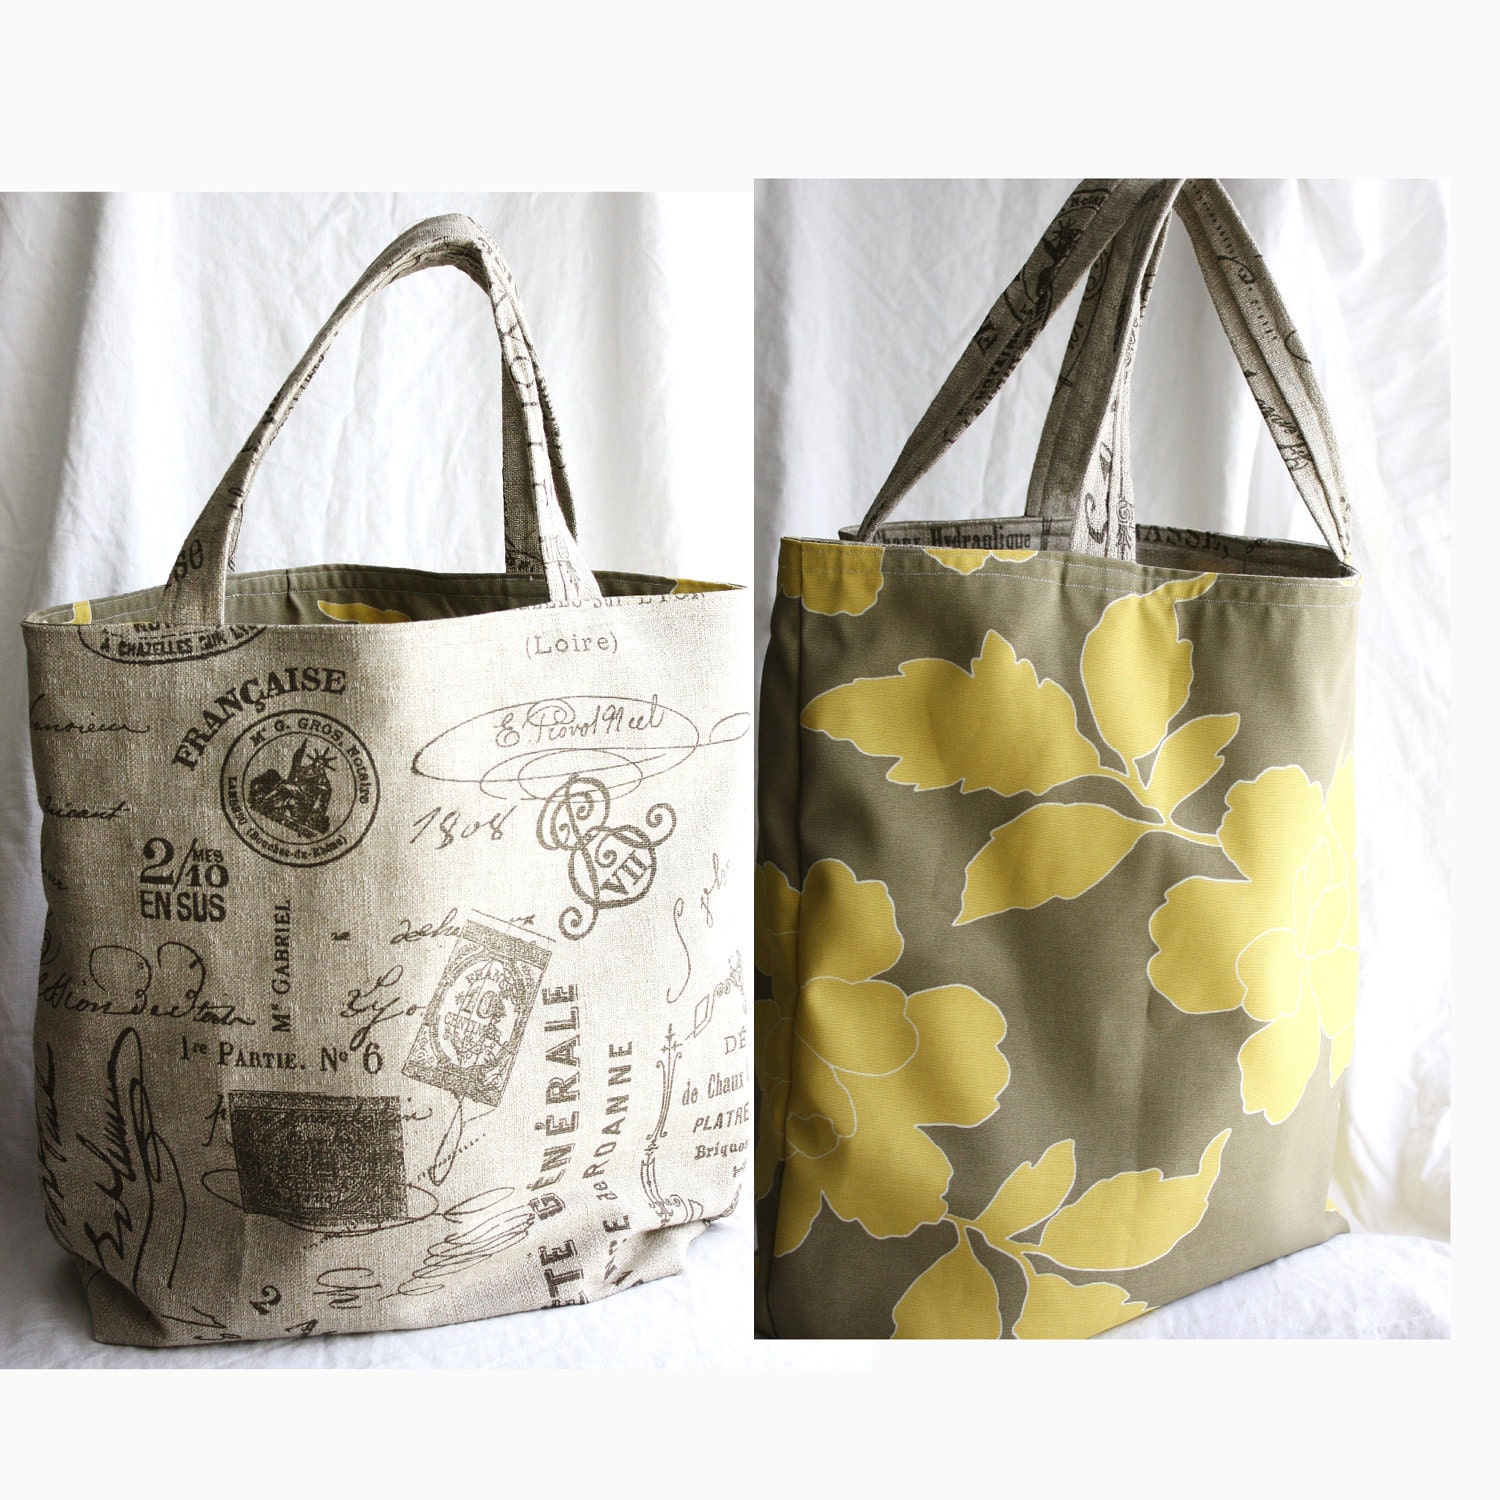 Extra Large Reversible market tote bag for groceries, books, shopping or gym. French country script with yellow & greige waterproof interior